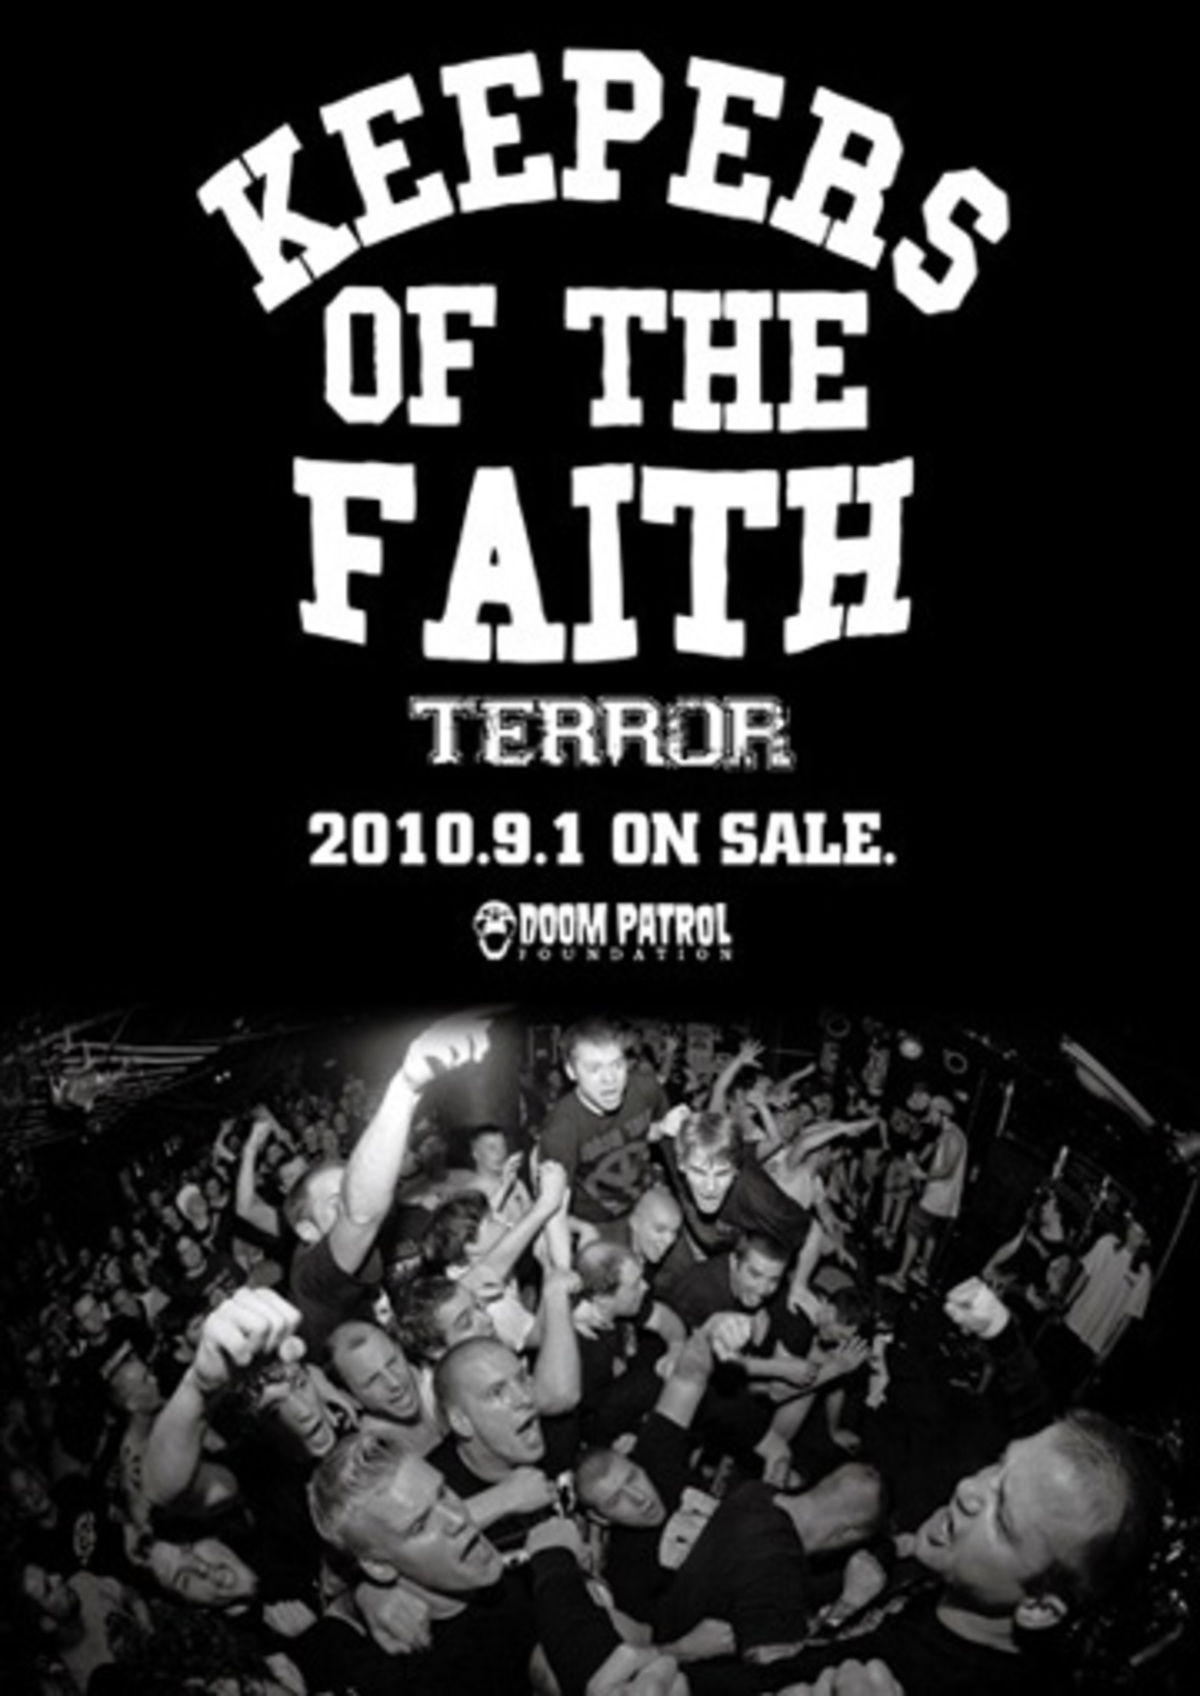 download mp3 terror keepers of the faith